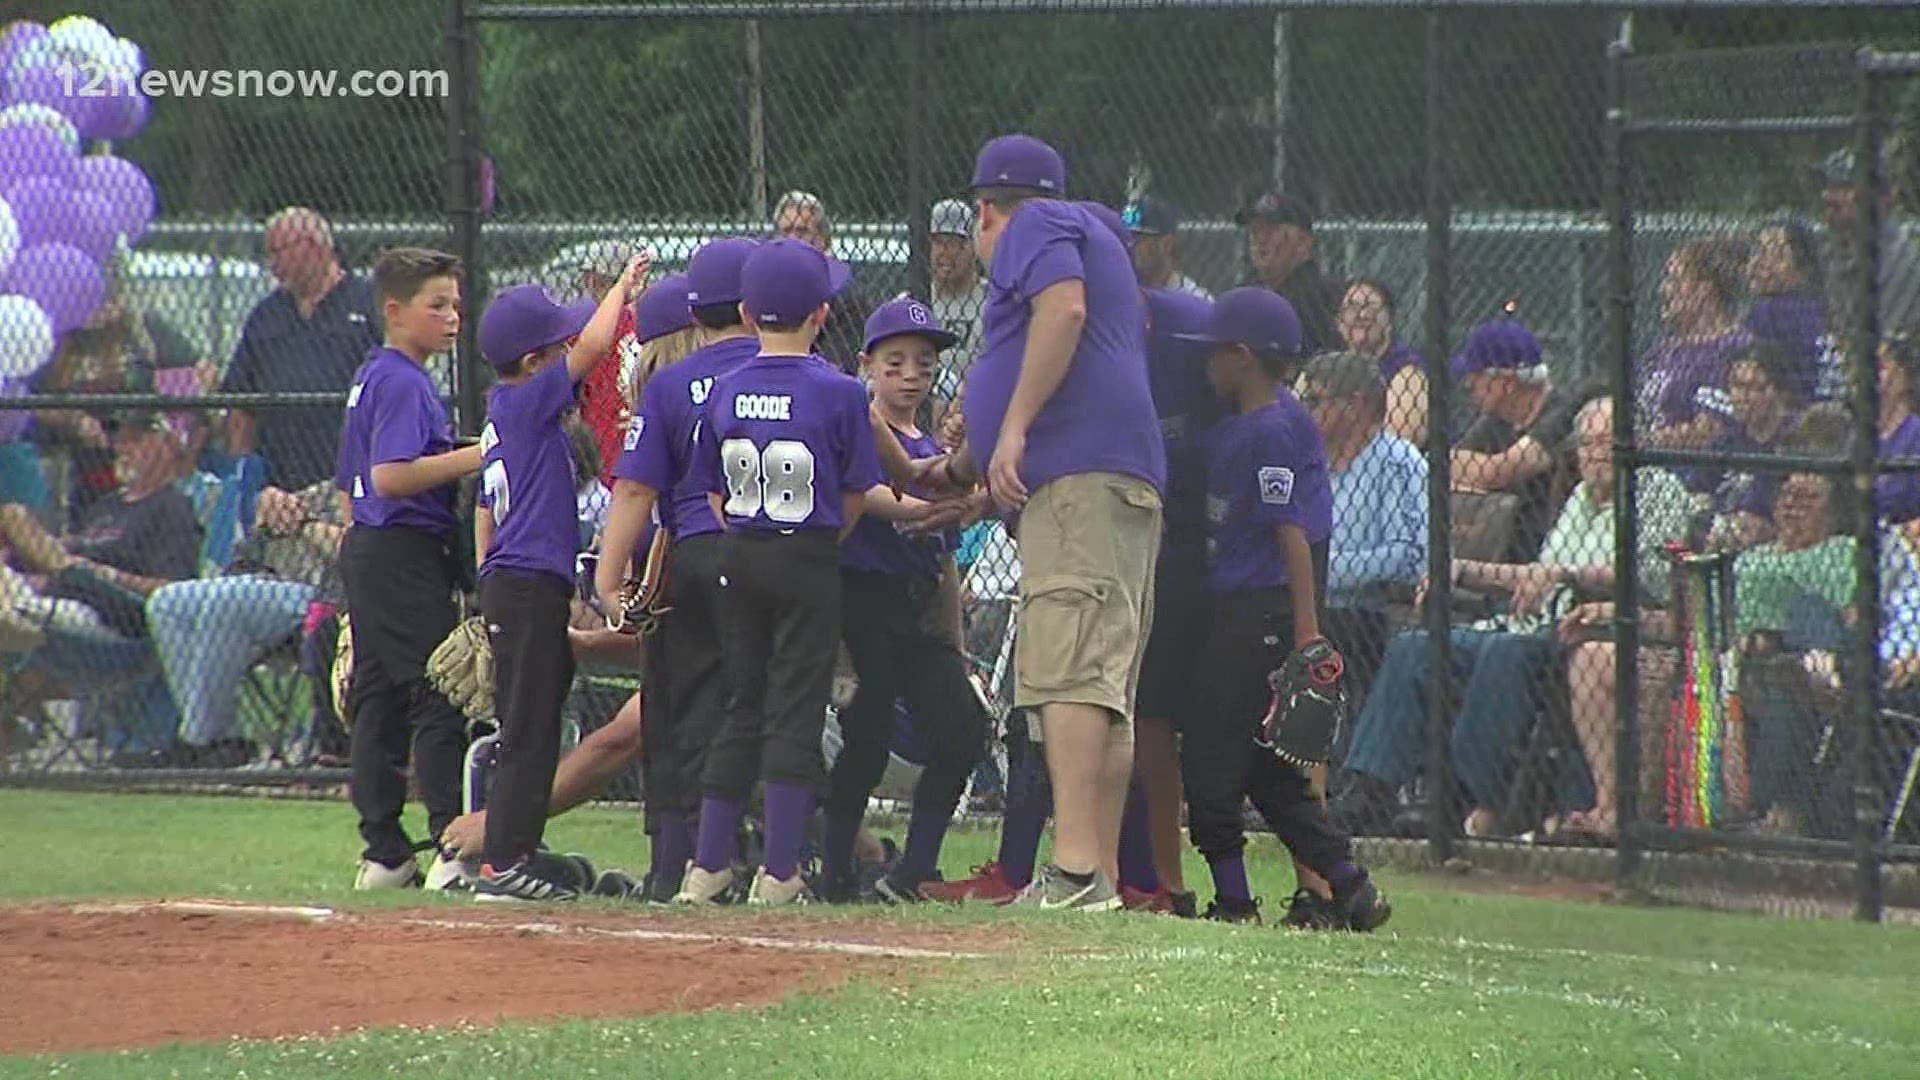 Groves National will host winner of Port Neches and Nederland in District 32 title game